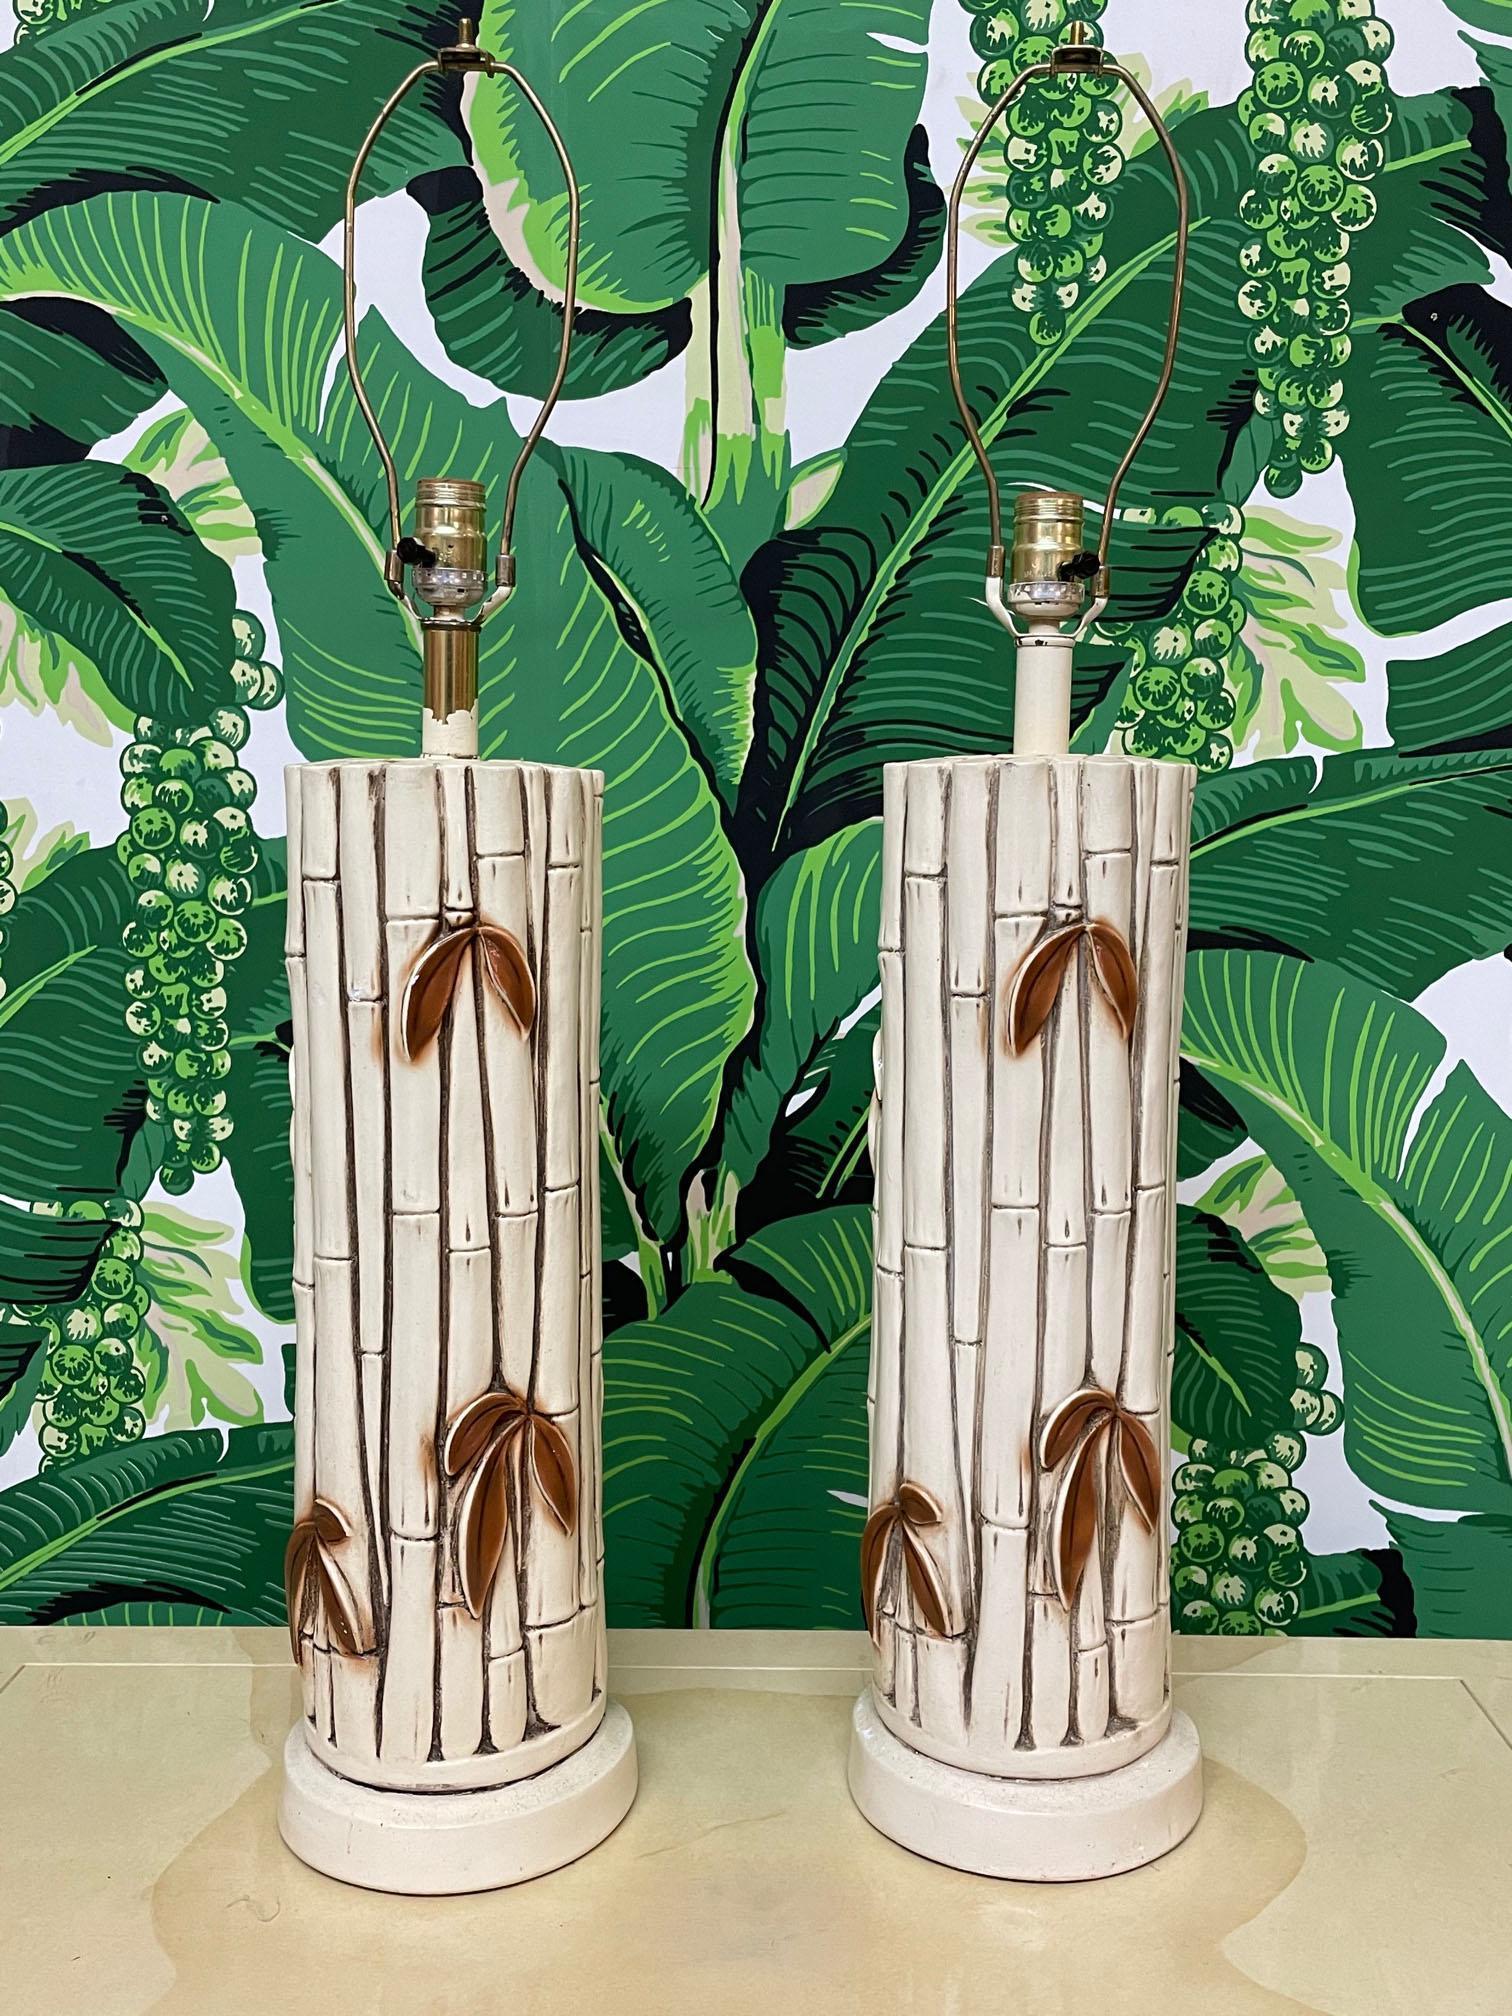 Pair of vintage table lamps in faux bamboo style. Ceramic/plaster composition. Good condition with minor imperfections consistent with age, see photos for condition details. We also have the matching floor lamp, check our other listings. 
For a